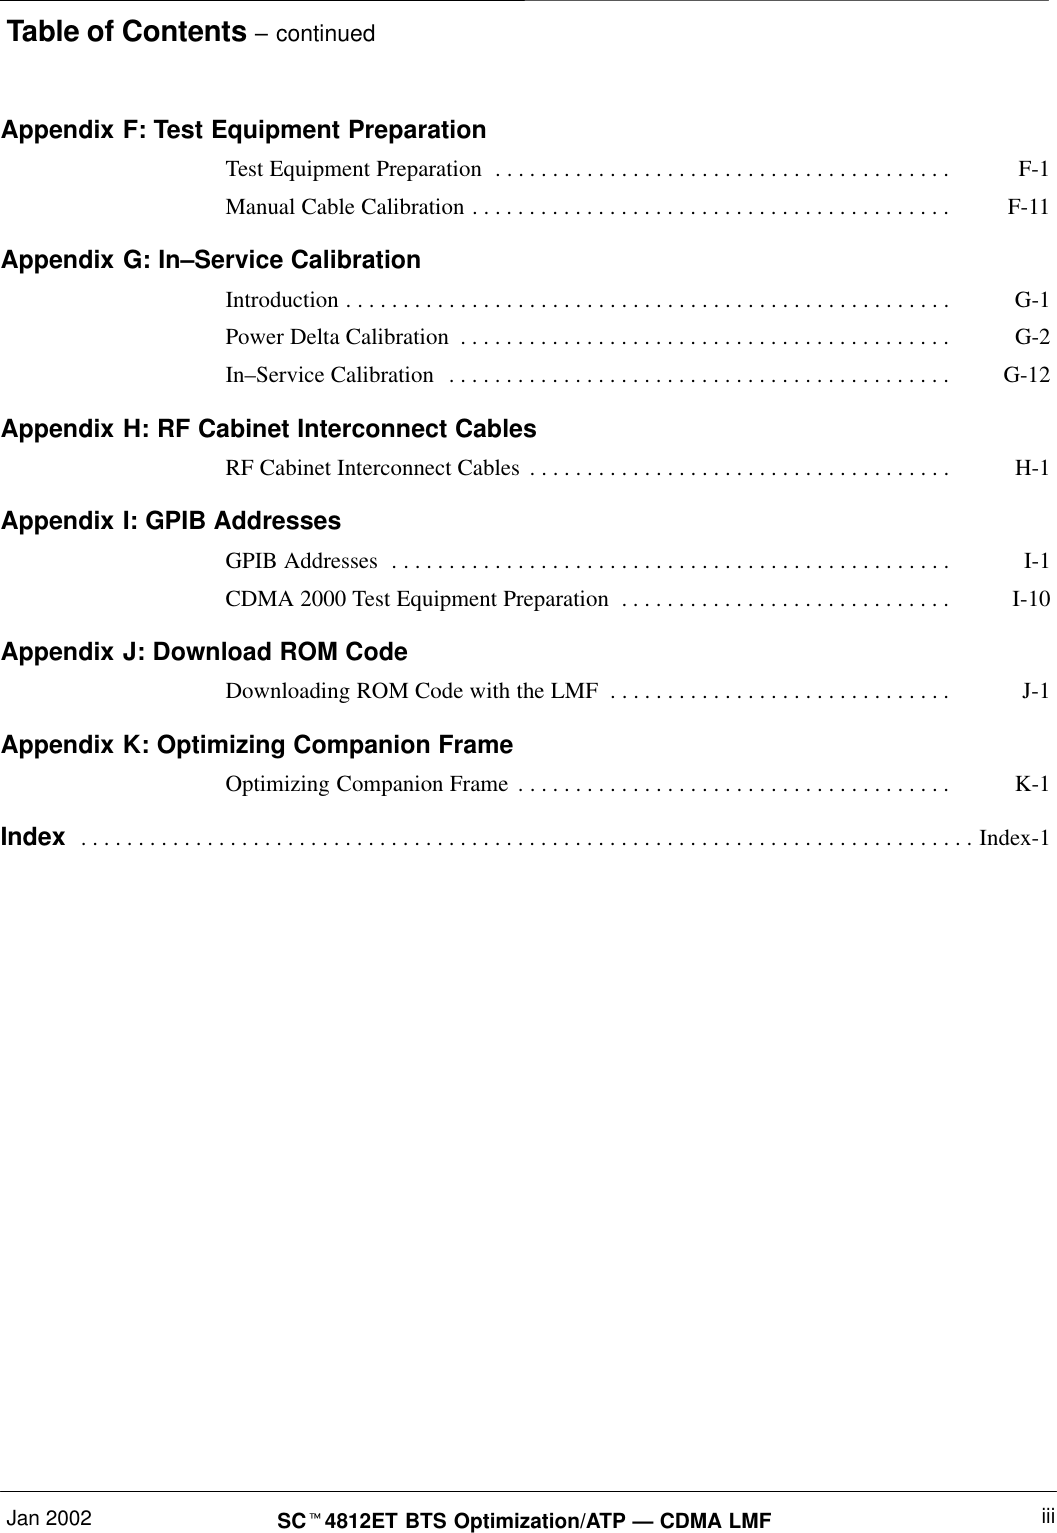 Table of Contents – continuedJan 2002 iiiSCt4812ET BTS Optimization/ATP — CDMA LMFAppendix F: Test Equipment PreparationTest Equipment Preparation F-1. . . . . . . . . . . . . . . . . . . . . . . . . . . . . . . . . . . . . . . . Manual Cable Calibration F-11. . . . . . . . . . . . . . . . . . . . . . . . . . . . . . . . . . . . . . . . . . Appendix G: In–Service CalibrationIntroduction G-1. . . . . . . . . . . . . . . . . . . . . . . . . . . . . . . . . . . . . . . . . . . . . . . . . . . . . Power Delta Calibration G-2. . . . . . . . . . . . . . . . . . . . . . . . . . . . . . . . . . . . . . . . . . . In–Service Calibration G-12. . . . . . . . . . . . . . . . . . . . . . . . . . . . . . . . . . . . . . . . . . . . Appendix H: RF Cabinet Interconnect CablesRF Cabinet Interconnect Cables H-1. . . . . . . . . . . . . . . . . . . . . . . . . . . . . . . . . . . . . Appendix I: GPIB AddressesGPIB Addresses I-1. . . . . . . . . . . . . . . . . . . . . . . . . . . . . . . . . . . . . . . . . . . . . . . . . CDMA 2000 Test Equipment Preparation I-10. . . . . . . . . . . . . . . . . . . . . . . . . . . . . Appendix J: Download ROM CodeDownloading ROM Code with the LMF J-1. . . . . . . . . . . . . . . . . . . . . . . . . . . . . . Appendix K: Optimizing Companion FrameOptimizing Companion Frame K-1. . . . . . . . . . . . . . . . . . . . . . . . . . . . . . . . . . . . . . Index Index-1. . . . . . . . . . . . . . . . . . . . . . . . . . . . . . . . . . . . . . . . . . . . . . . . . . . . . . . . . . . . . . . . . . . . . . . . . . . . . . 